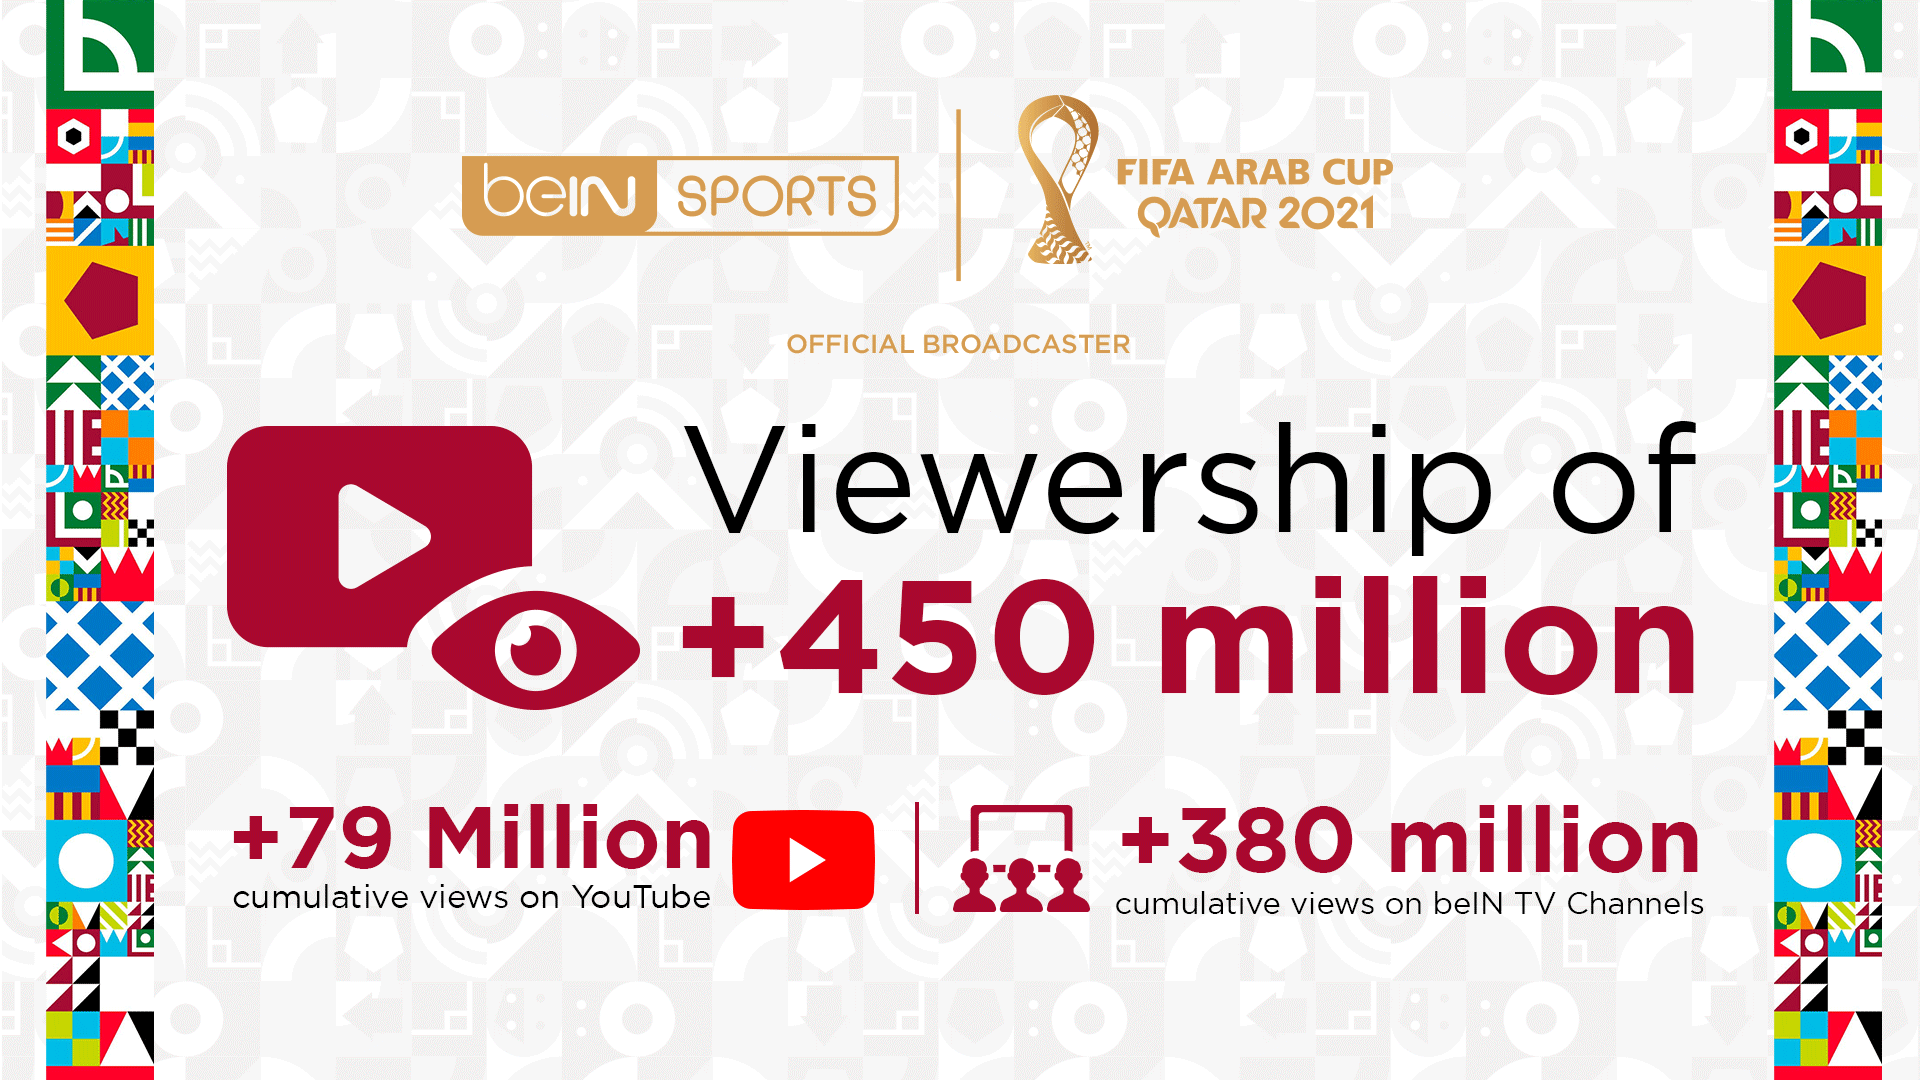 More Records Achieved at beIN SPORTS as Viewership Exceeds 450 Million During the FIFA Arab Cup Qatar 2021